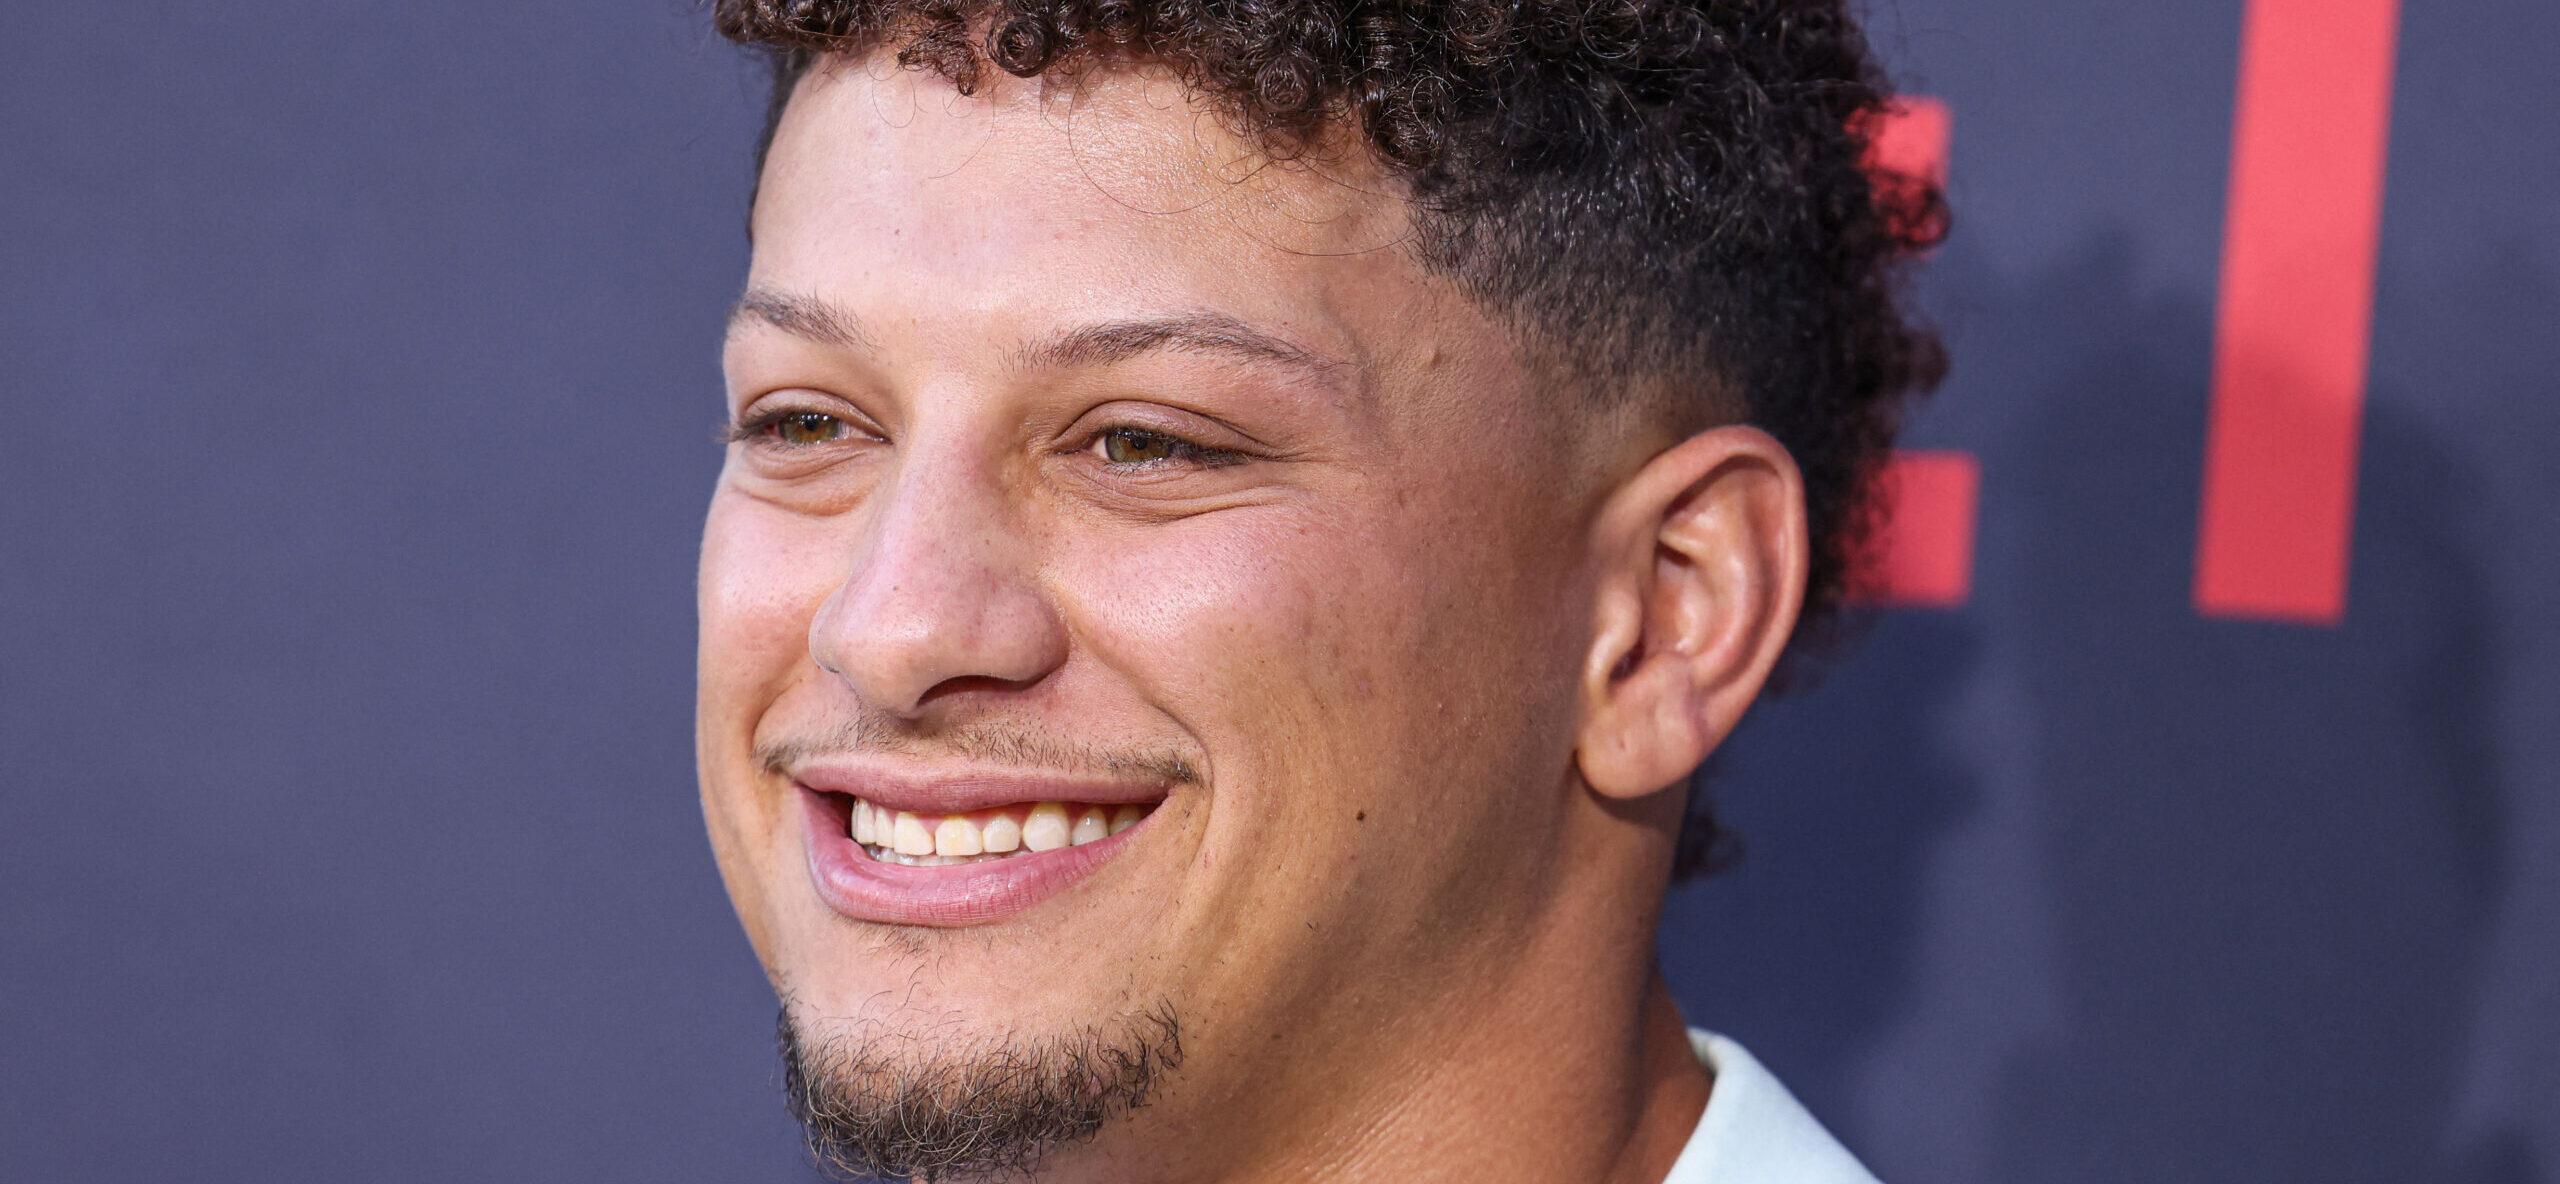 Patrick Mahomes Airs Out Dirty Laundry: Admits A Filthy NFL Gameday Ritual